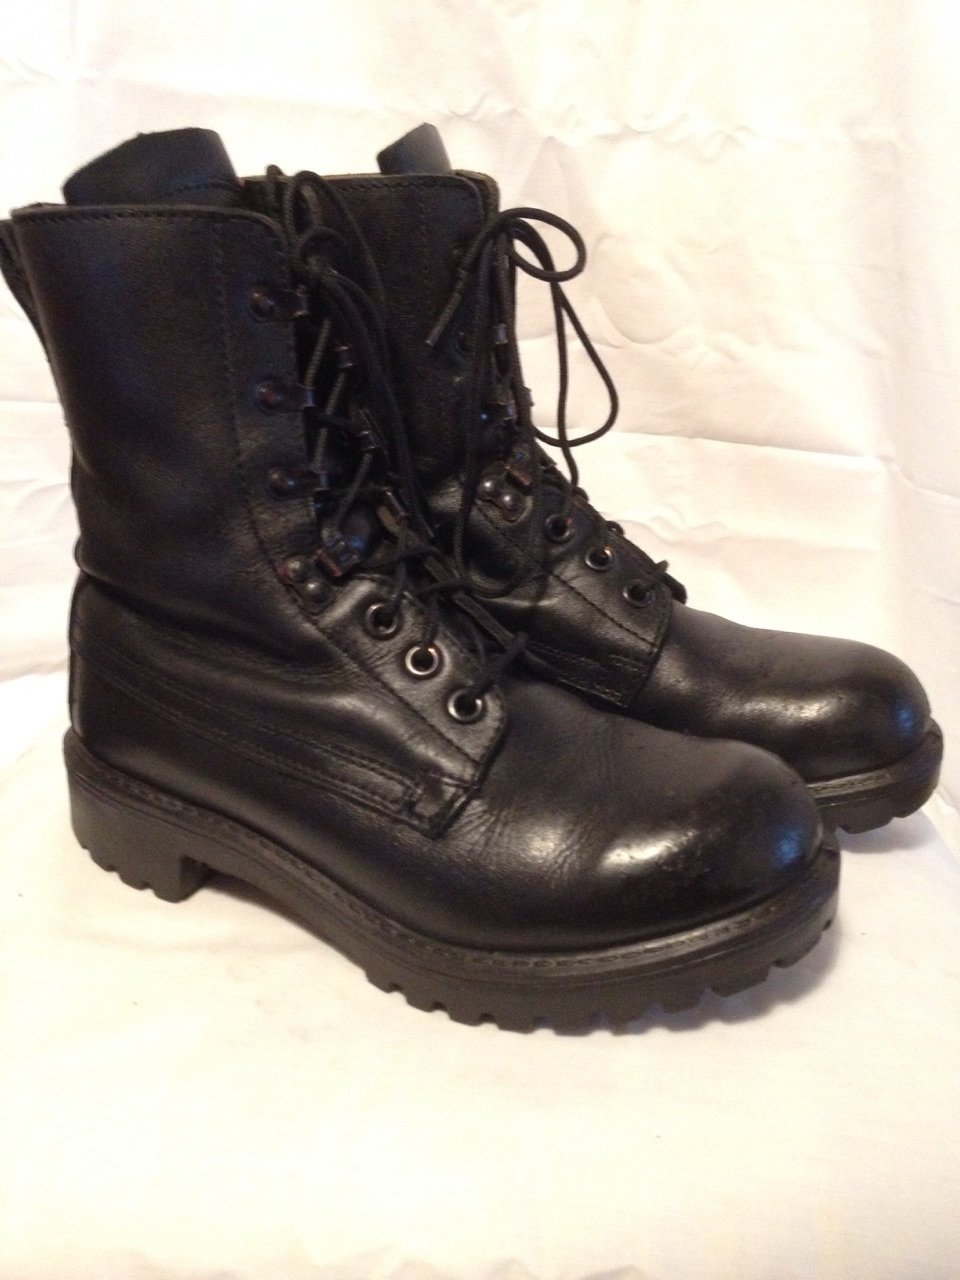 British Army Assault Boots Size 10L